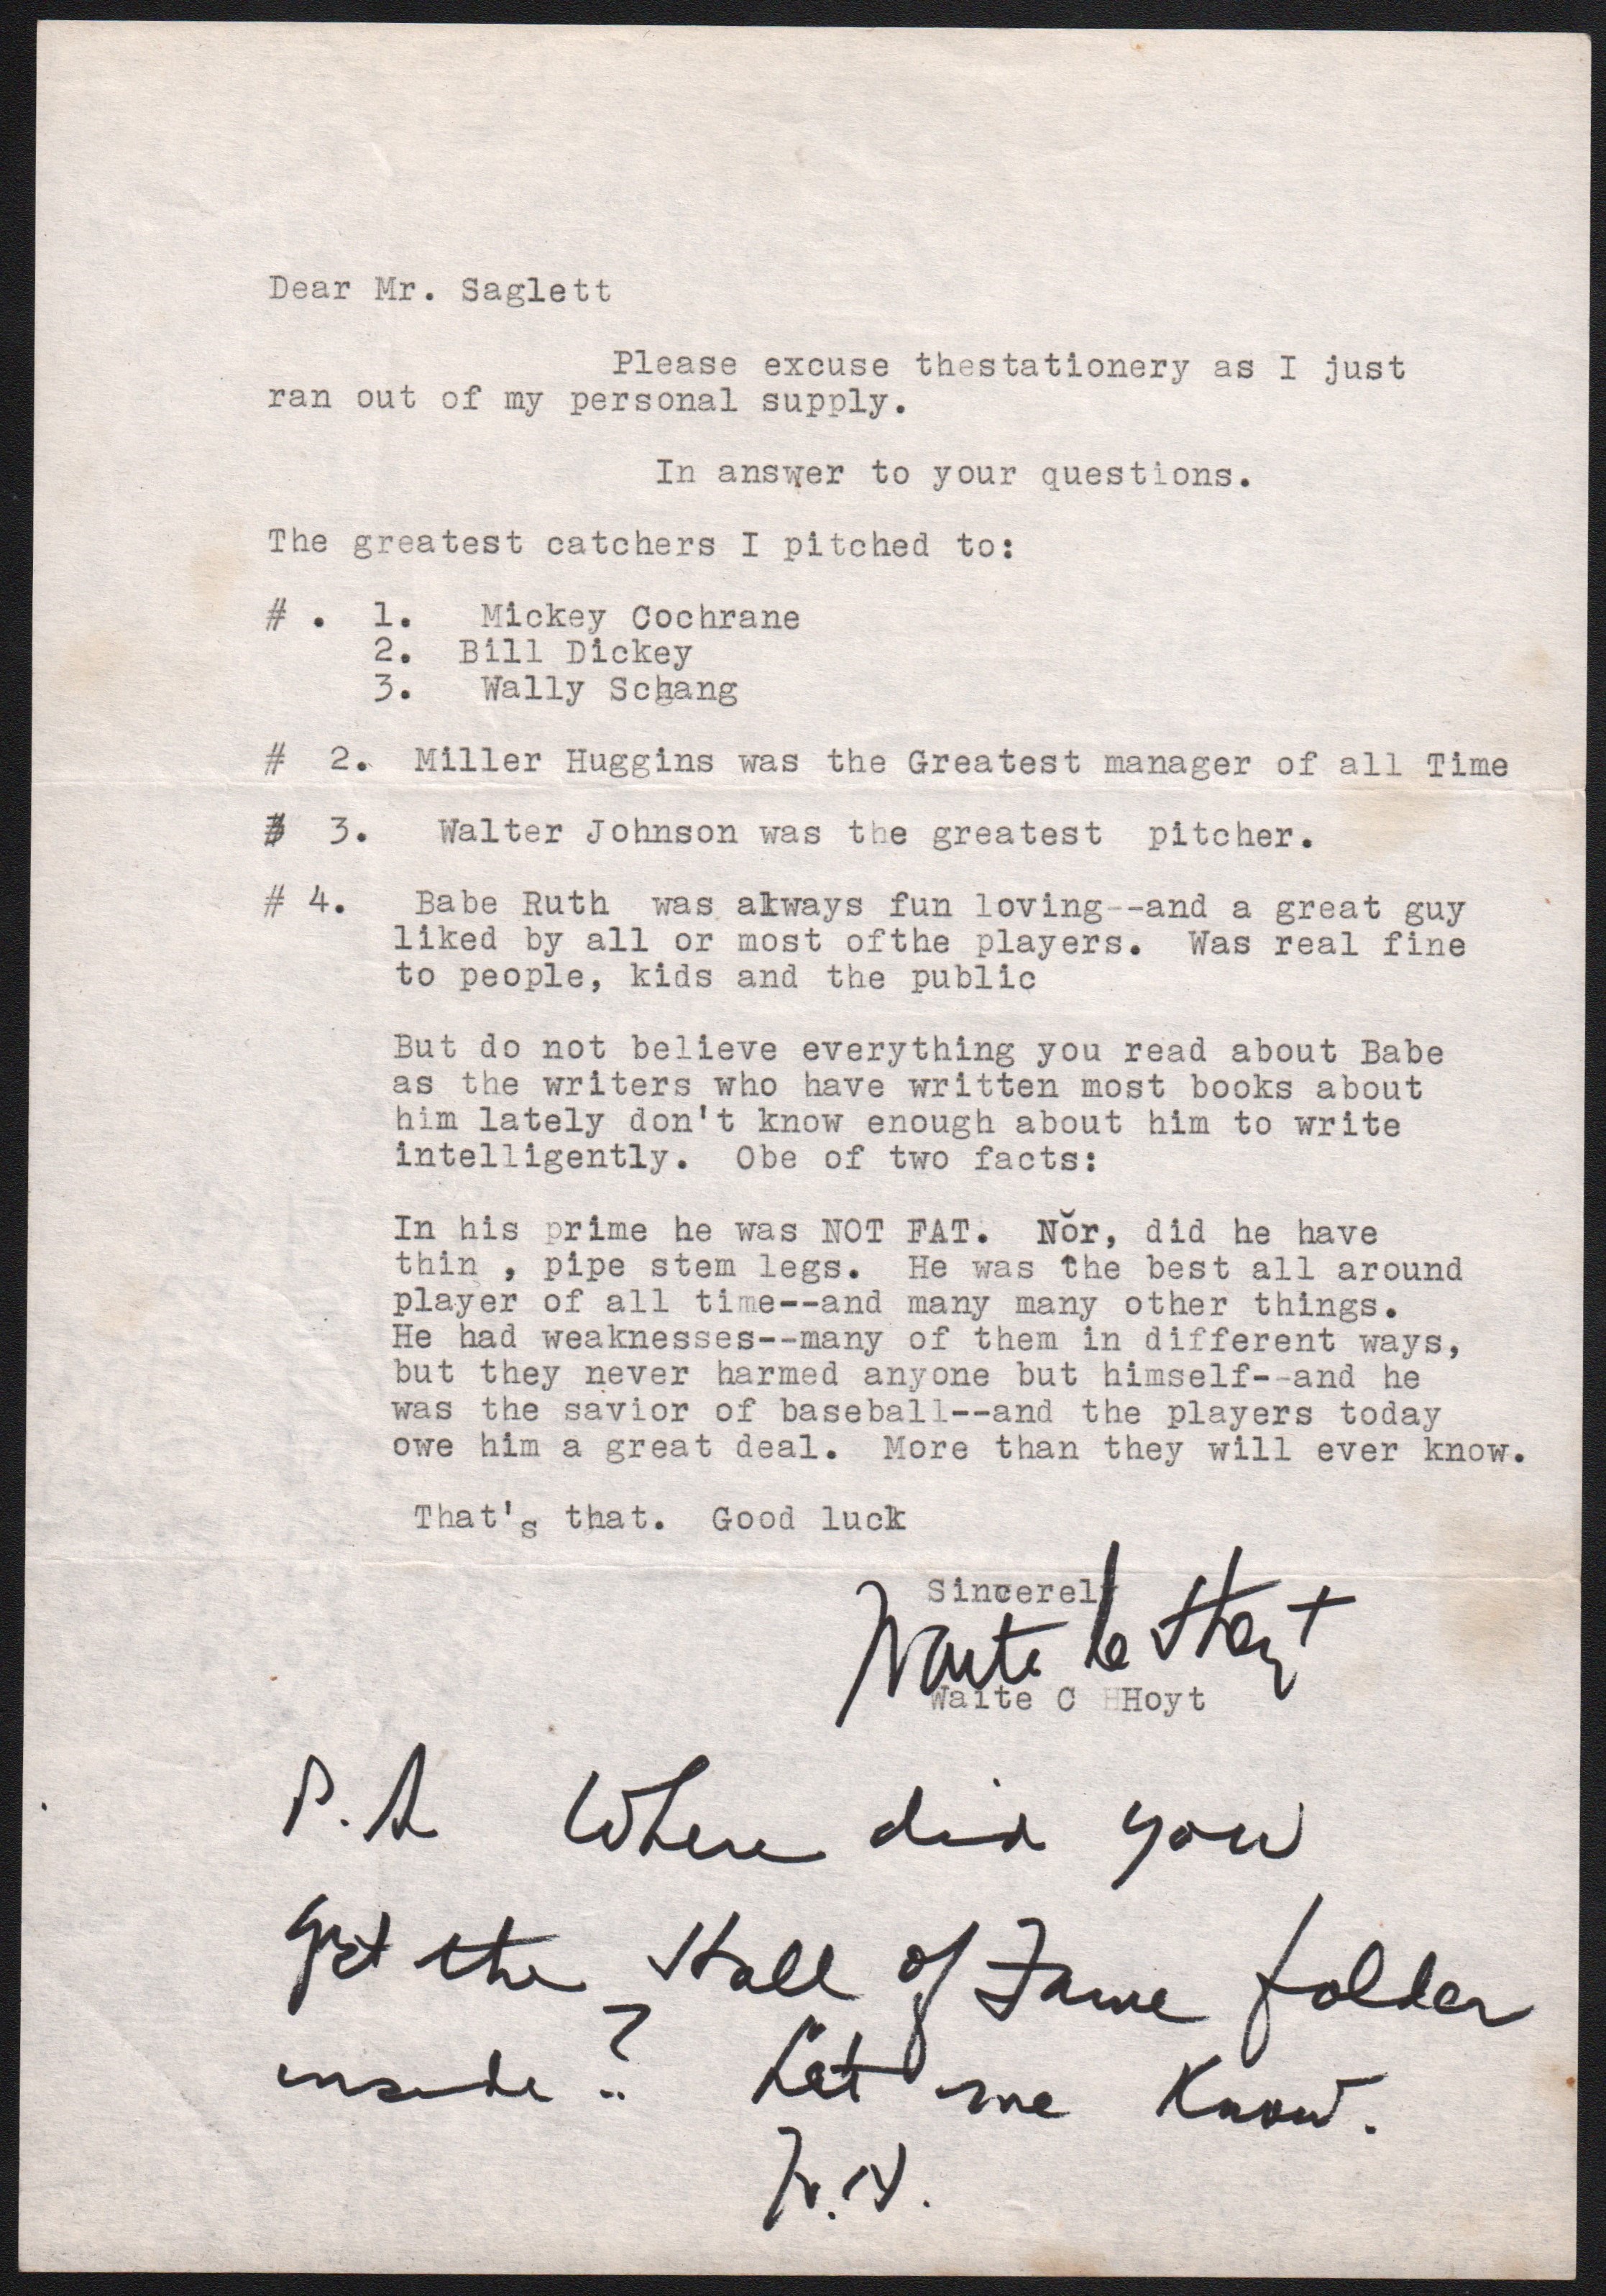 Waite Hoyt Letter w/ Babe Ruth and Walter Johnson Content